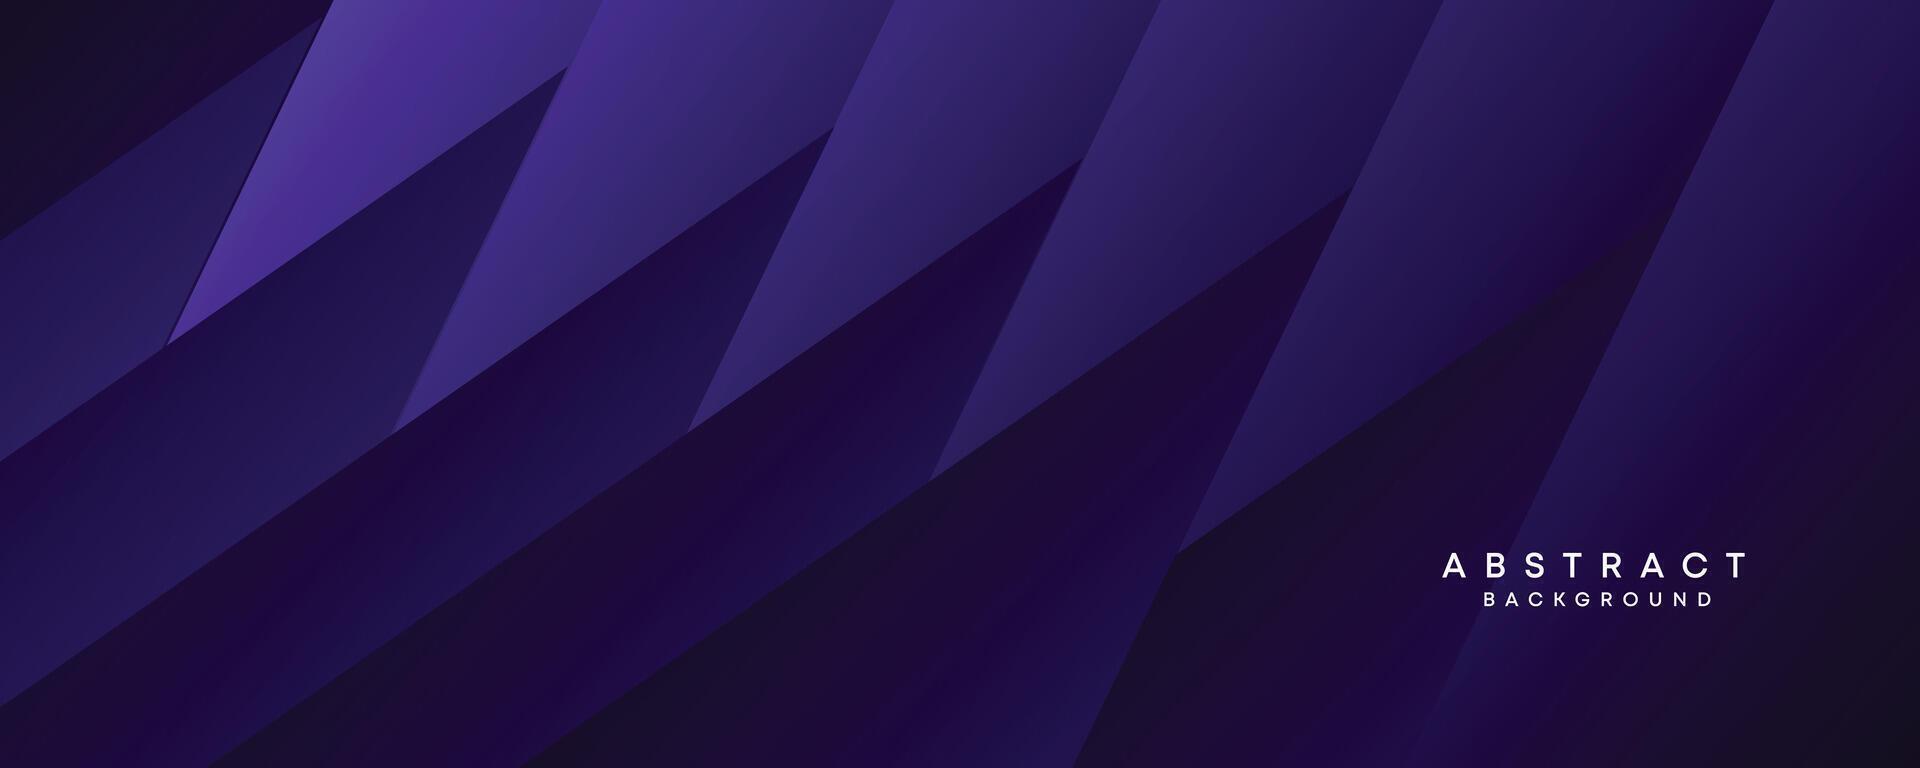 diagonal geometric overlay layer on an abstract dark purple banner design background. Contemporary graphic elements in the shape of squares. Makes a good cover, header, banner, brochure, or website vector